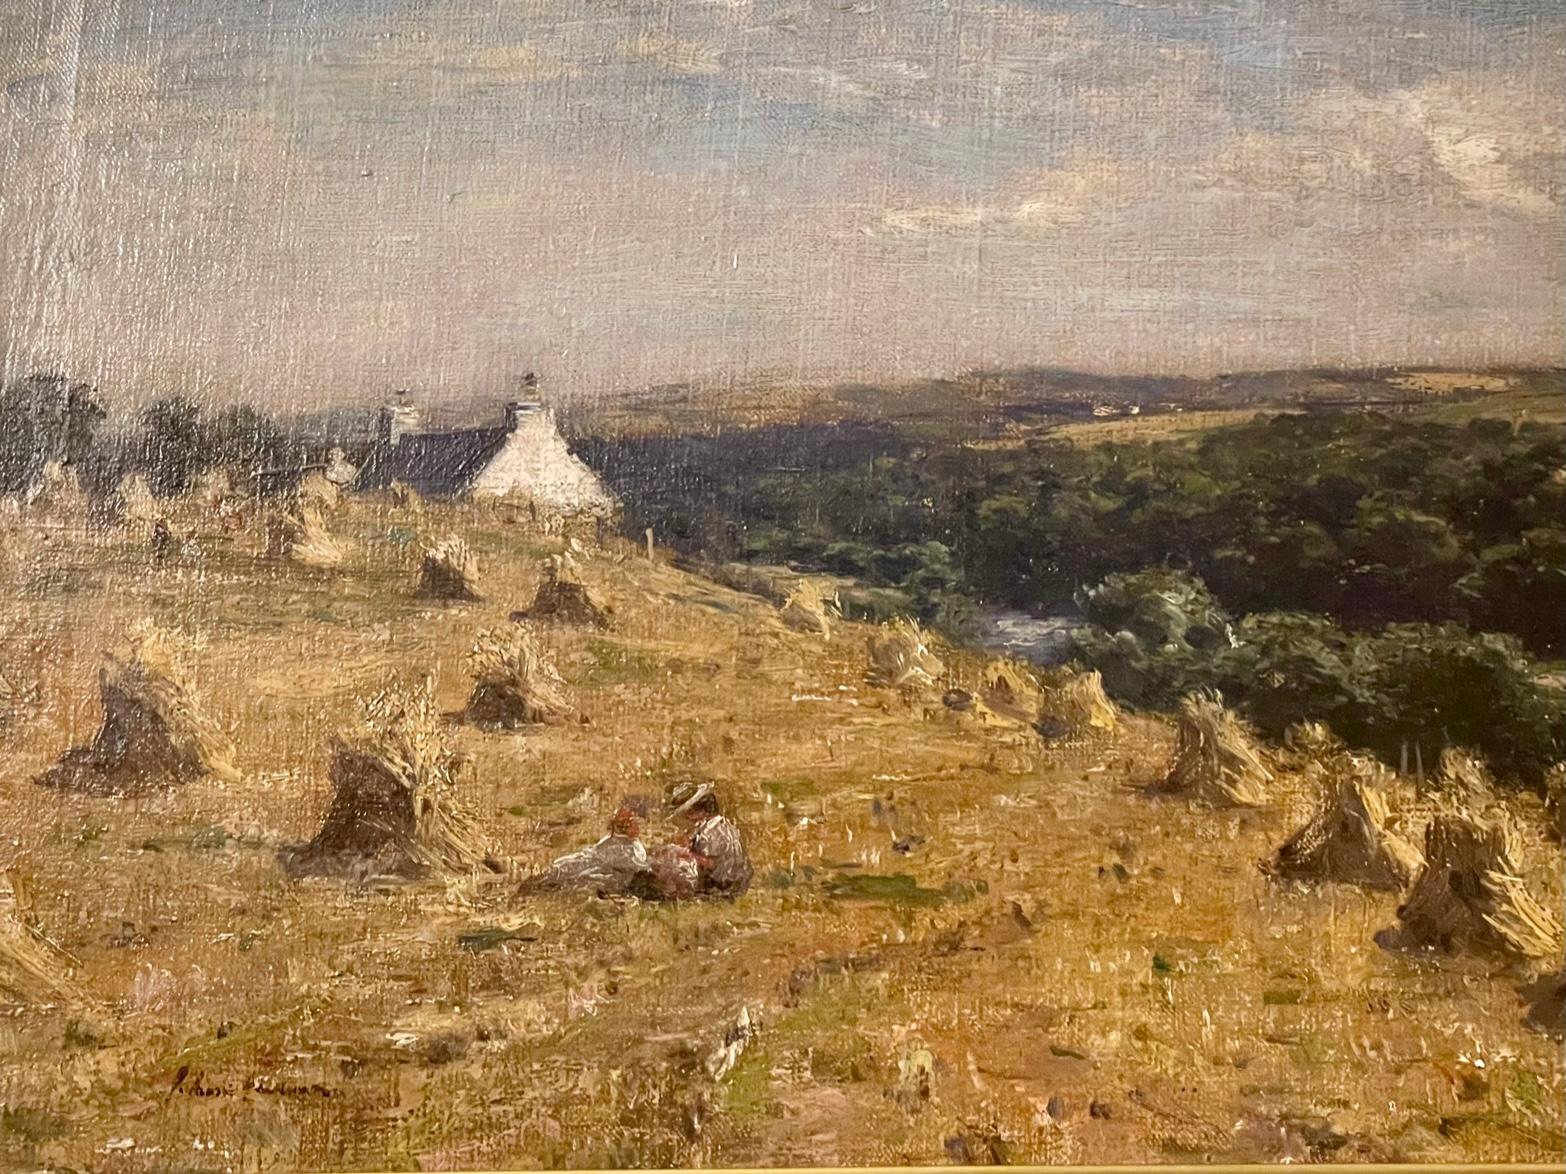 'Harvest Time' with Croft and Haystacks Impressionist oil on canvas painting is by popular Scottish artist Joseph Morris Henderson, RSA (1863-1936) known for Landscapes and Seascapes. Henderson exhibited in the London Royal Academy, the Royal